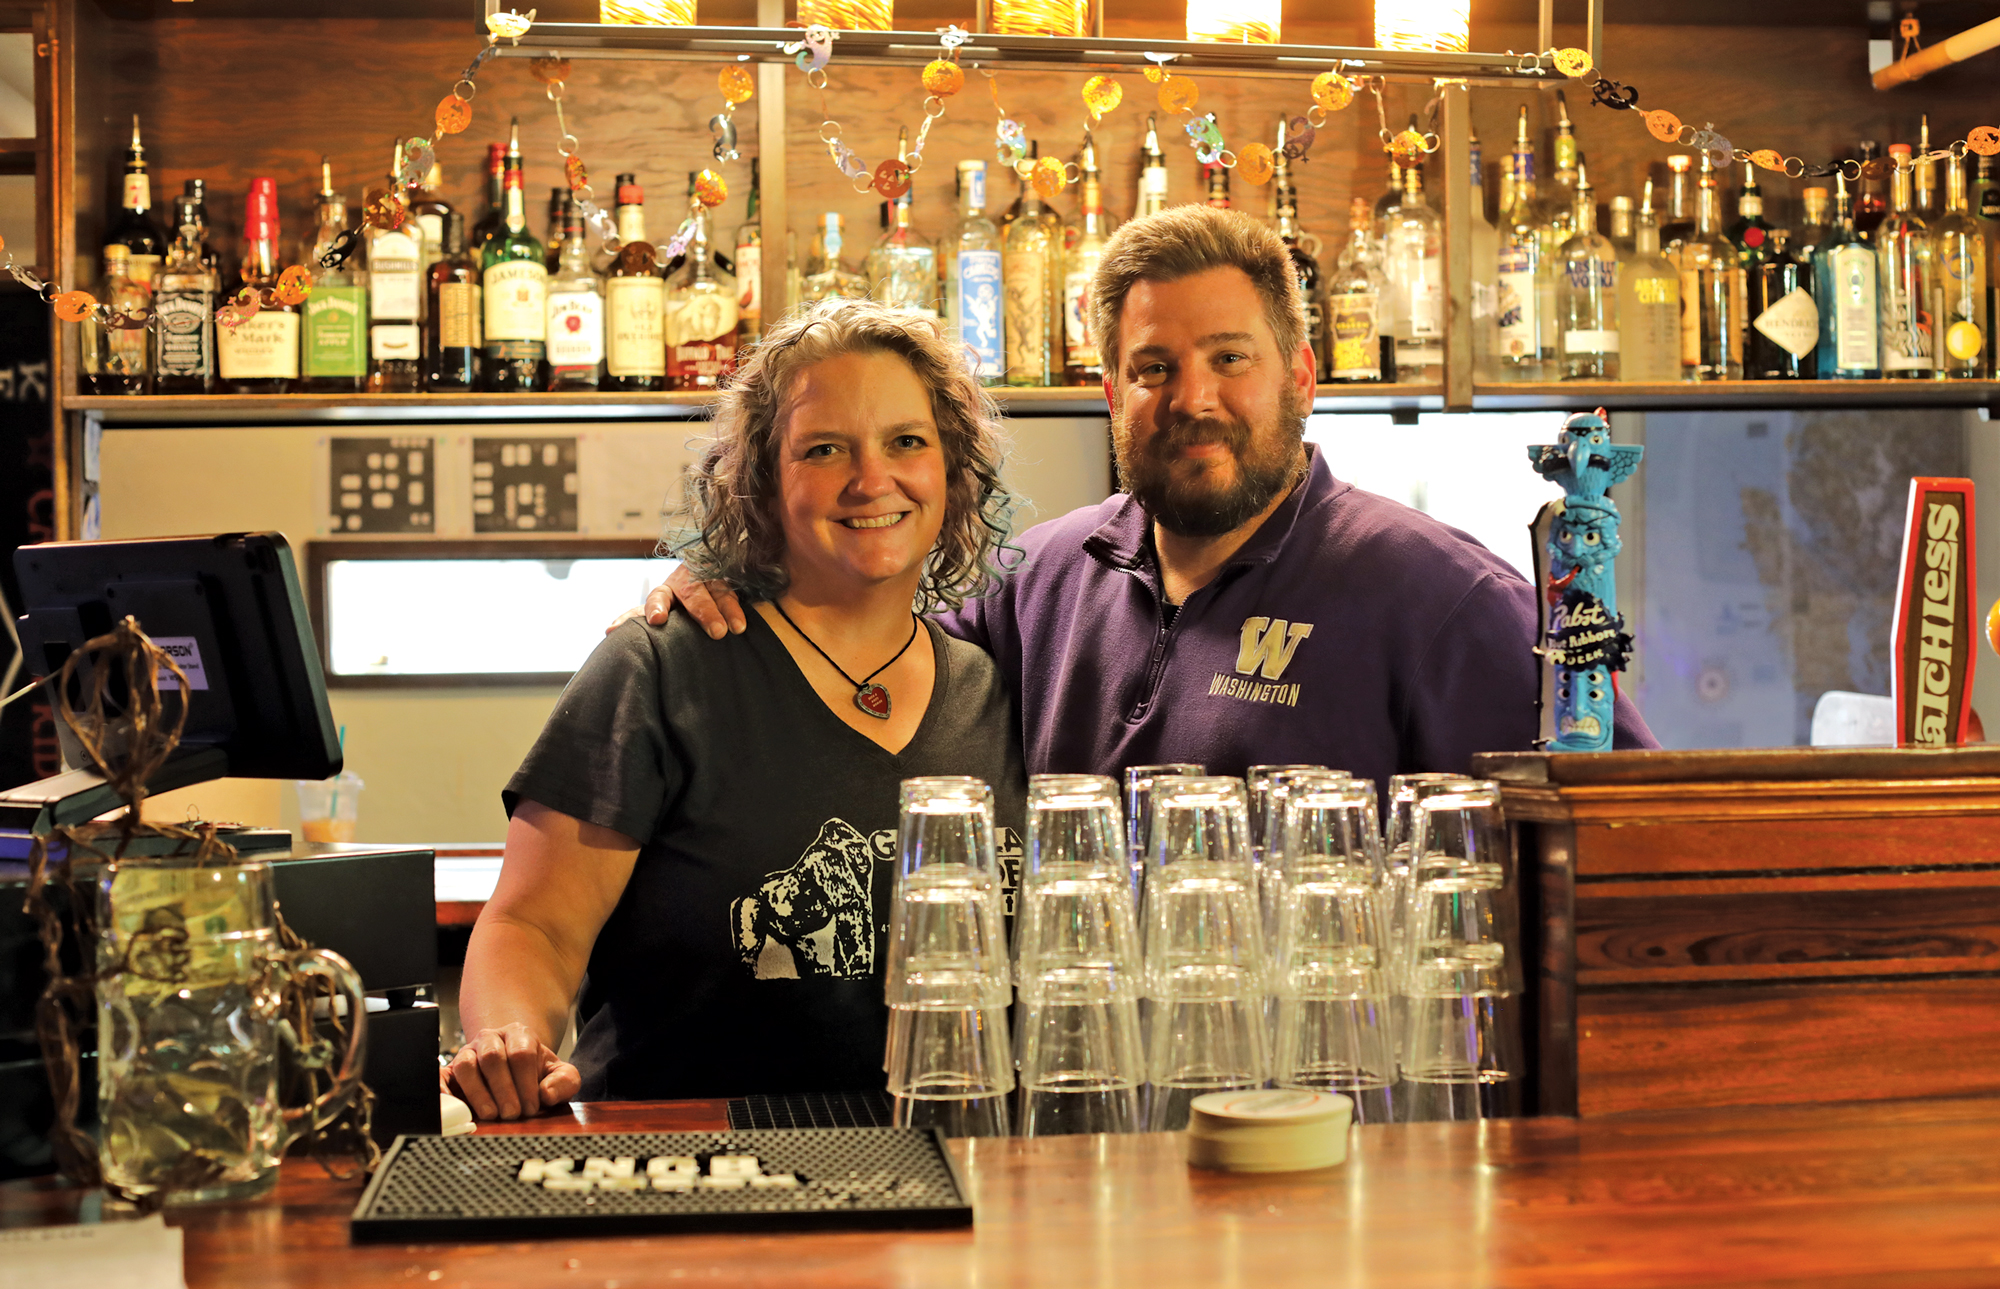 Jen Gonyer and Al Donahue smiling behind the College Inn bar